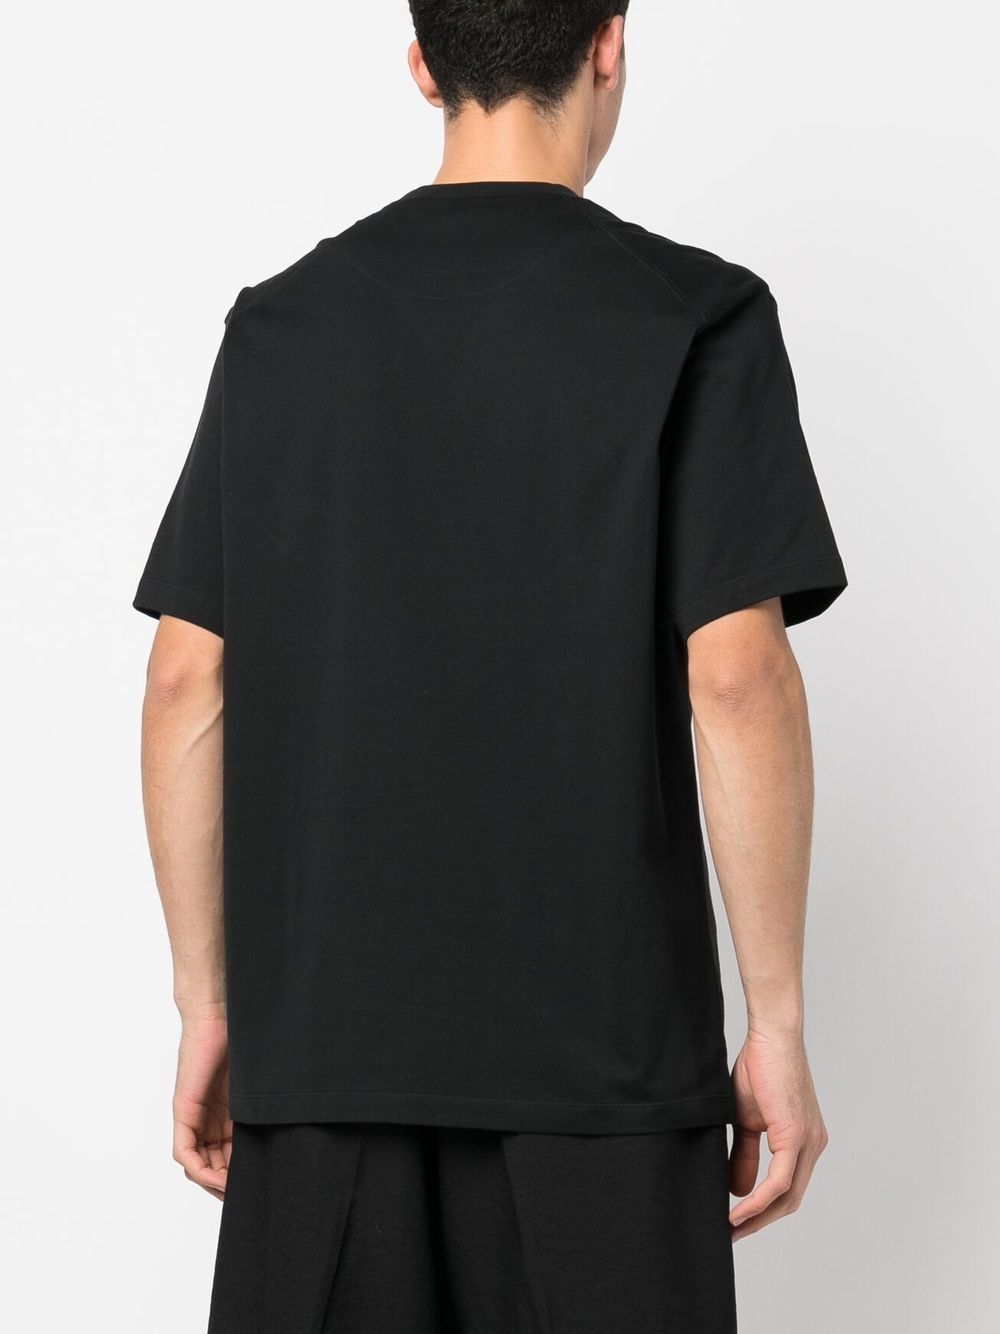 relaxed black t-shirt